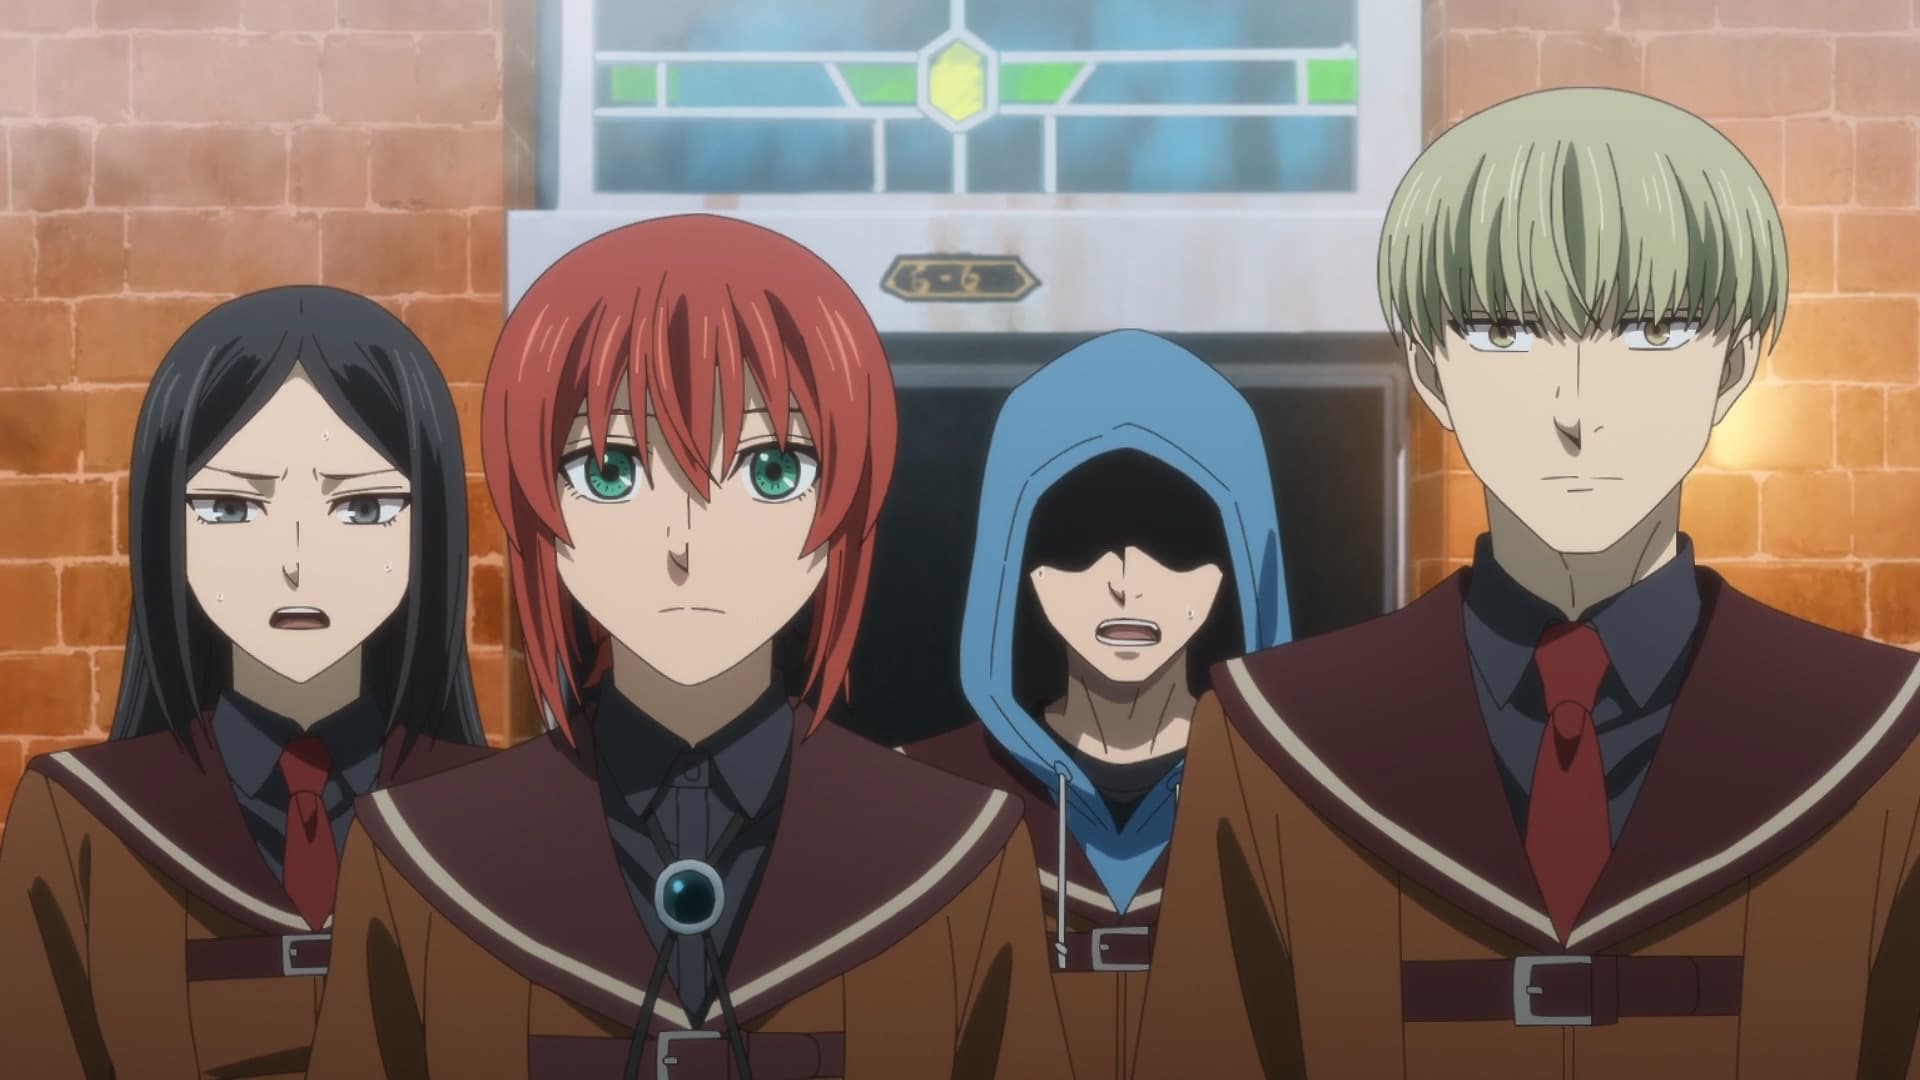 Watch The Ancient Magus' Bride season 2 episode 6 streaming online